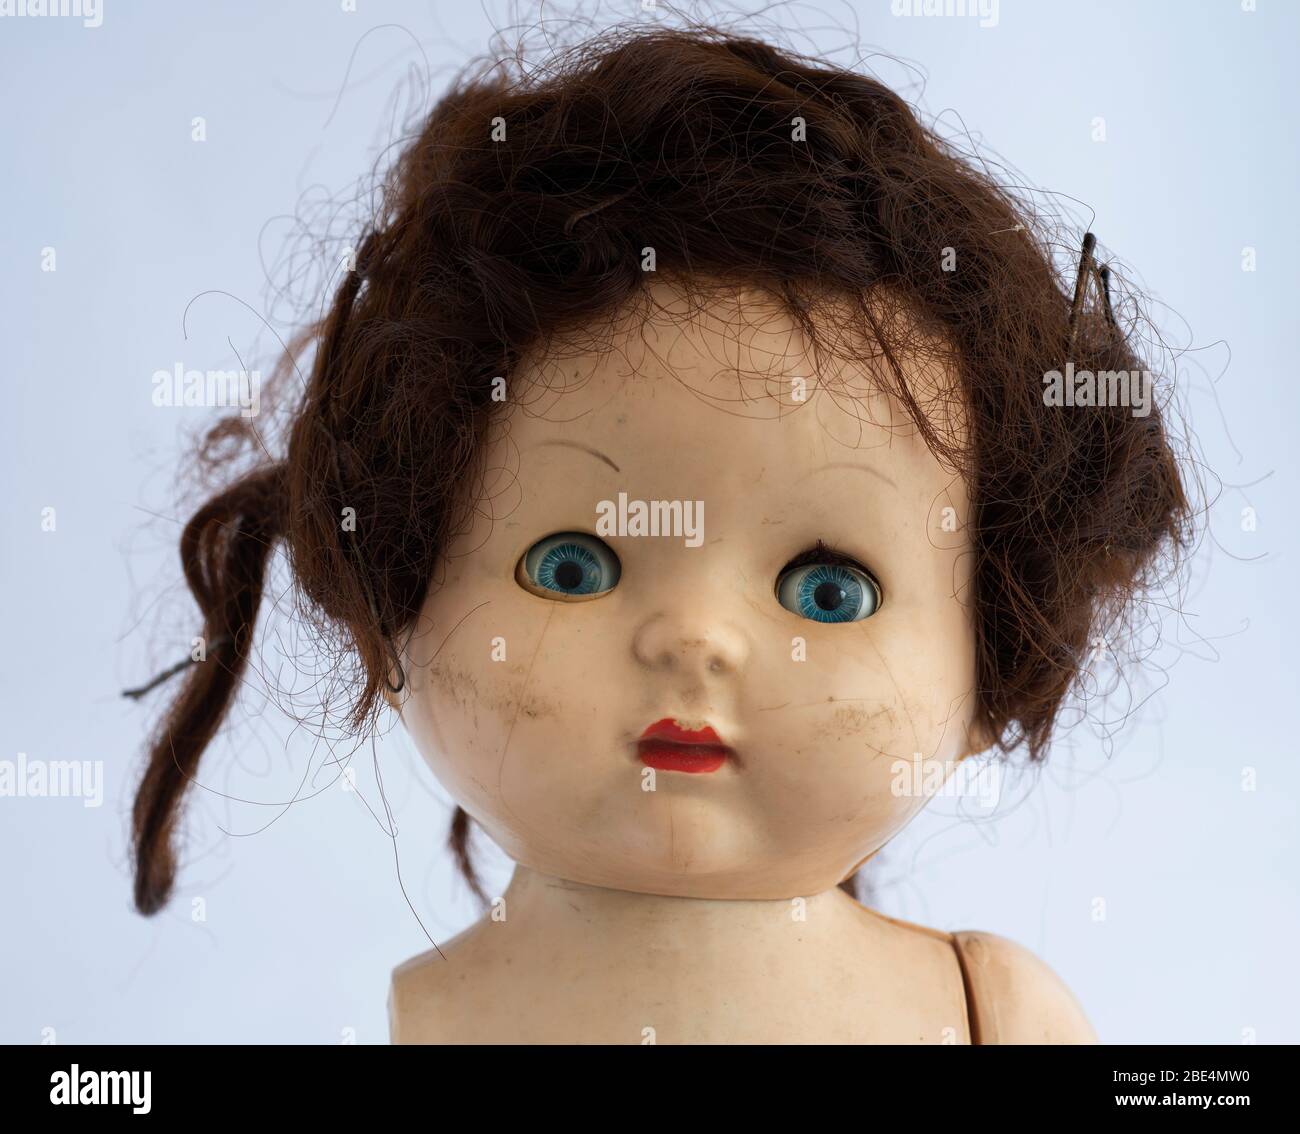 Vintage blue eye doll portrait .Red lipstick  and bad hair Stock Photo